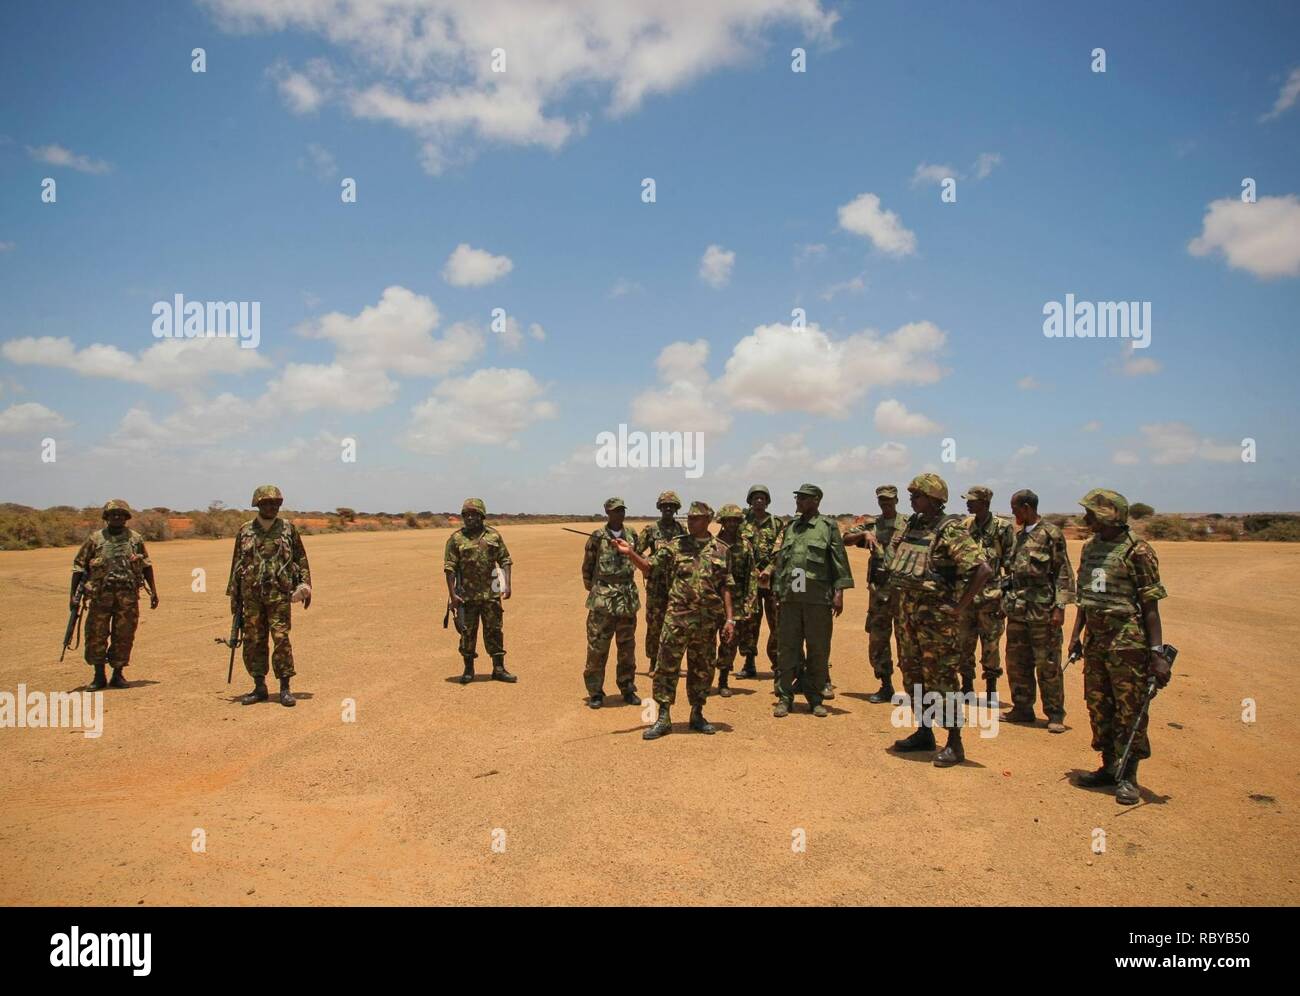 SOMALIA, Kismayo: 04 October, senior commanders of the Kenyan Contingent of the African Union Mission in Somalia (AMISOM) and the Somali National Army (SNA) inspect the runway at Kismayo airport. Kismayo, the last bastion of the once feared Al-Qaeda-affiliated extremist group Al Shabaab, fell after troops of the Somali National Army (SNA) and the pro-government Ras Kimboni Brigade milita supported by the Kenyan Contigent of the African Union Mission in Somalia (AMISOM) entered the port city on 02 October following a two month operation across southern Somalia which saw the liberation of villag Stock Photo